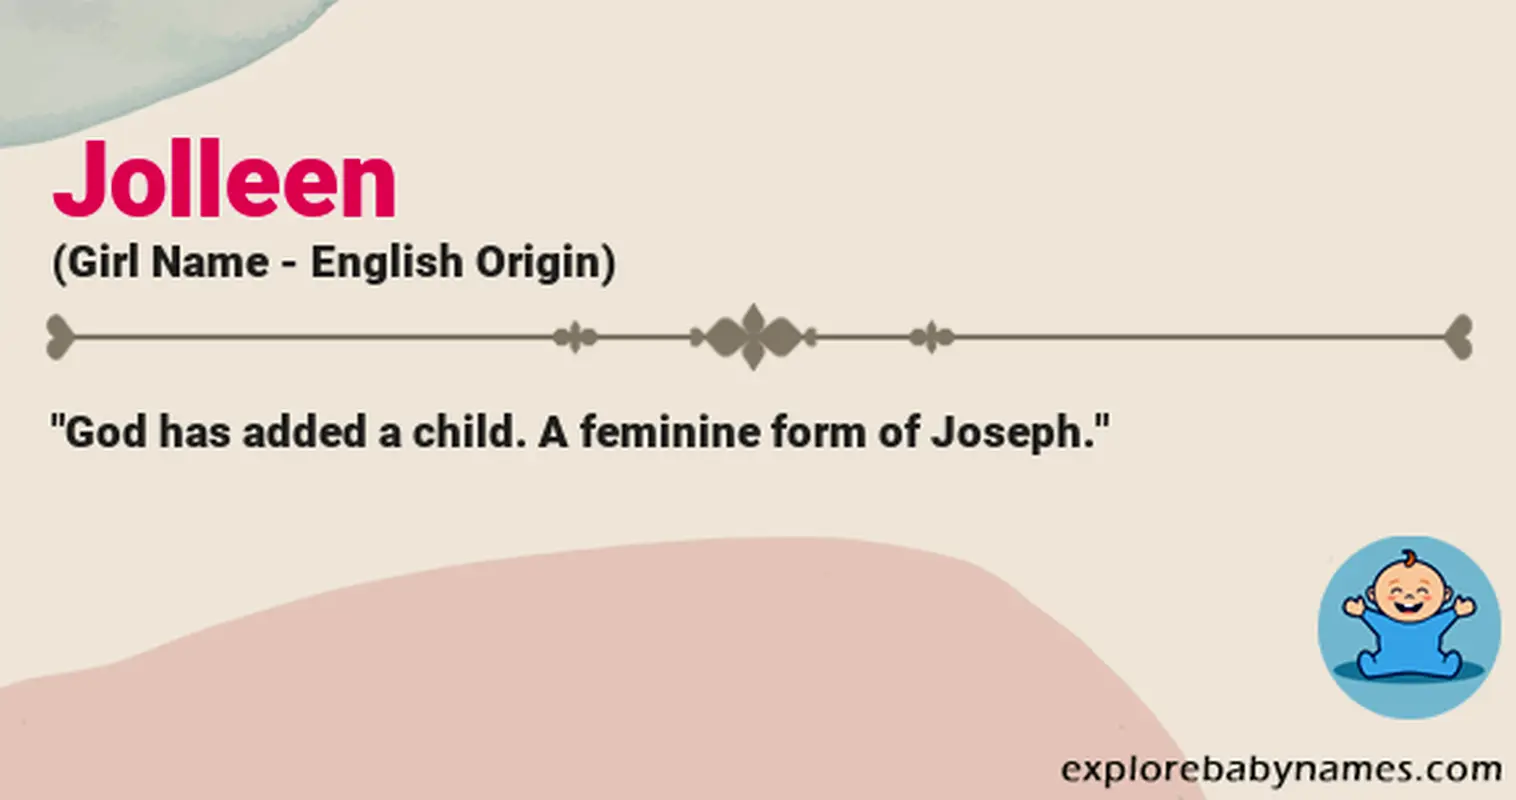 Meaning of Jolleen